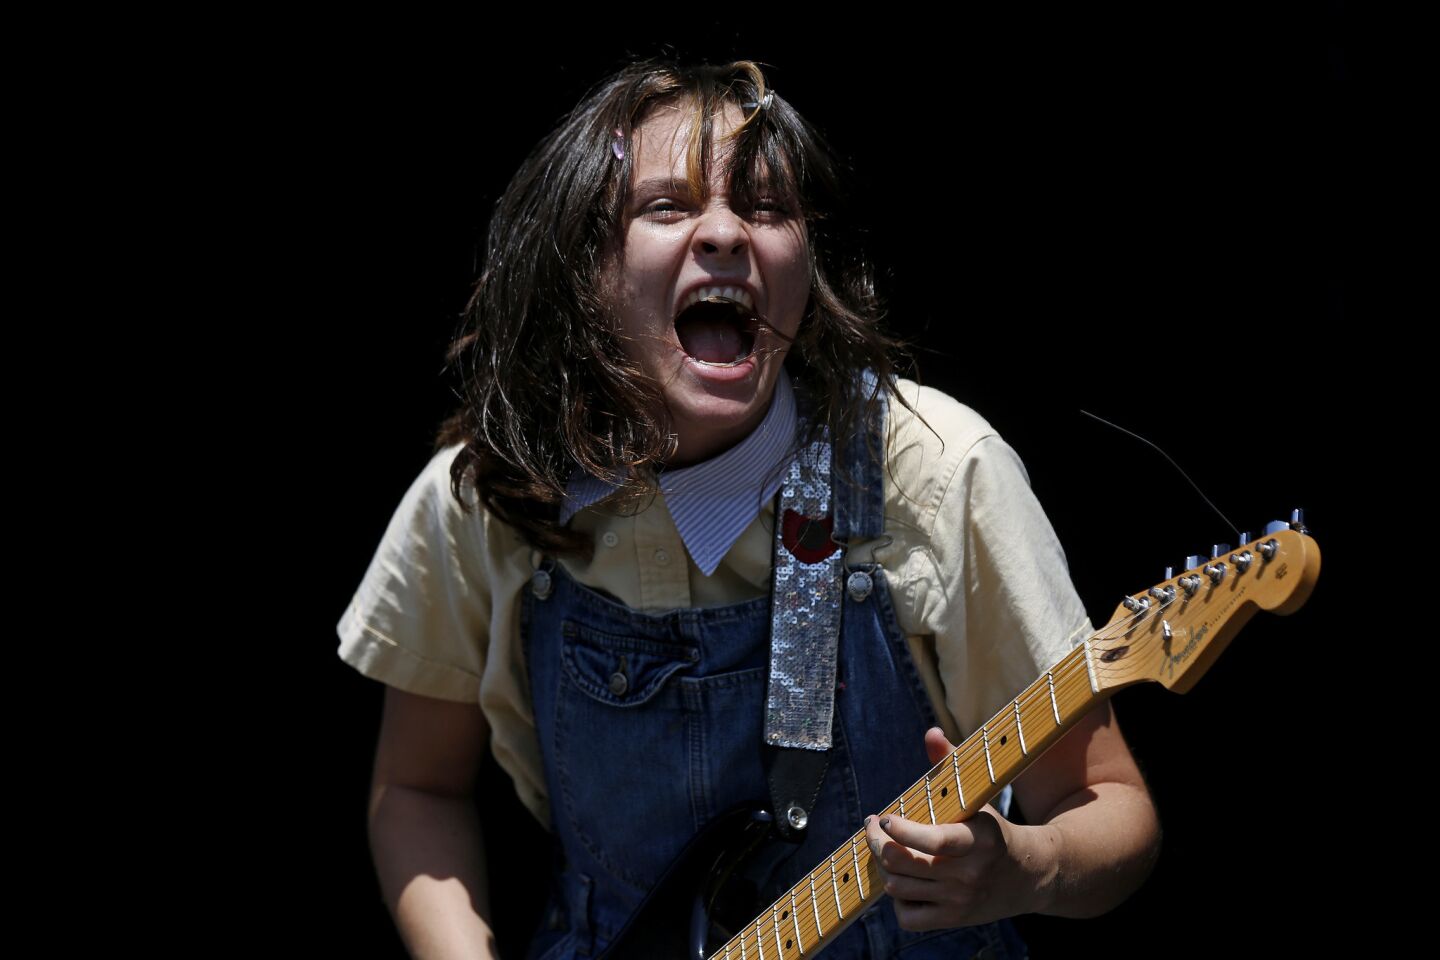 Clementine Creevy of Cherry Glazerr performs Sunday at FYF Fest in Exposition Park.